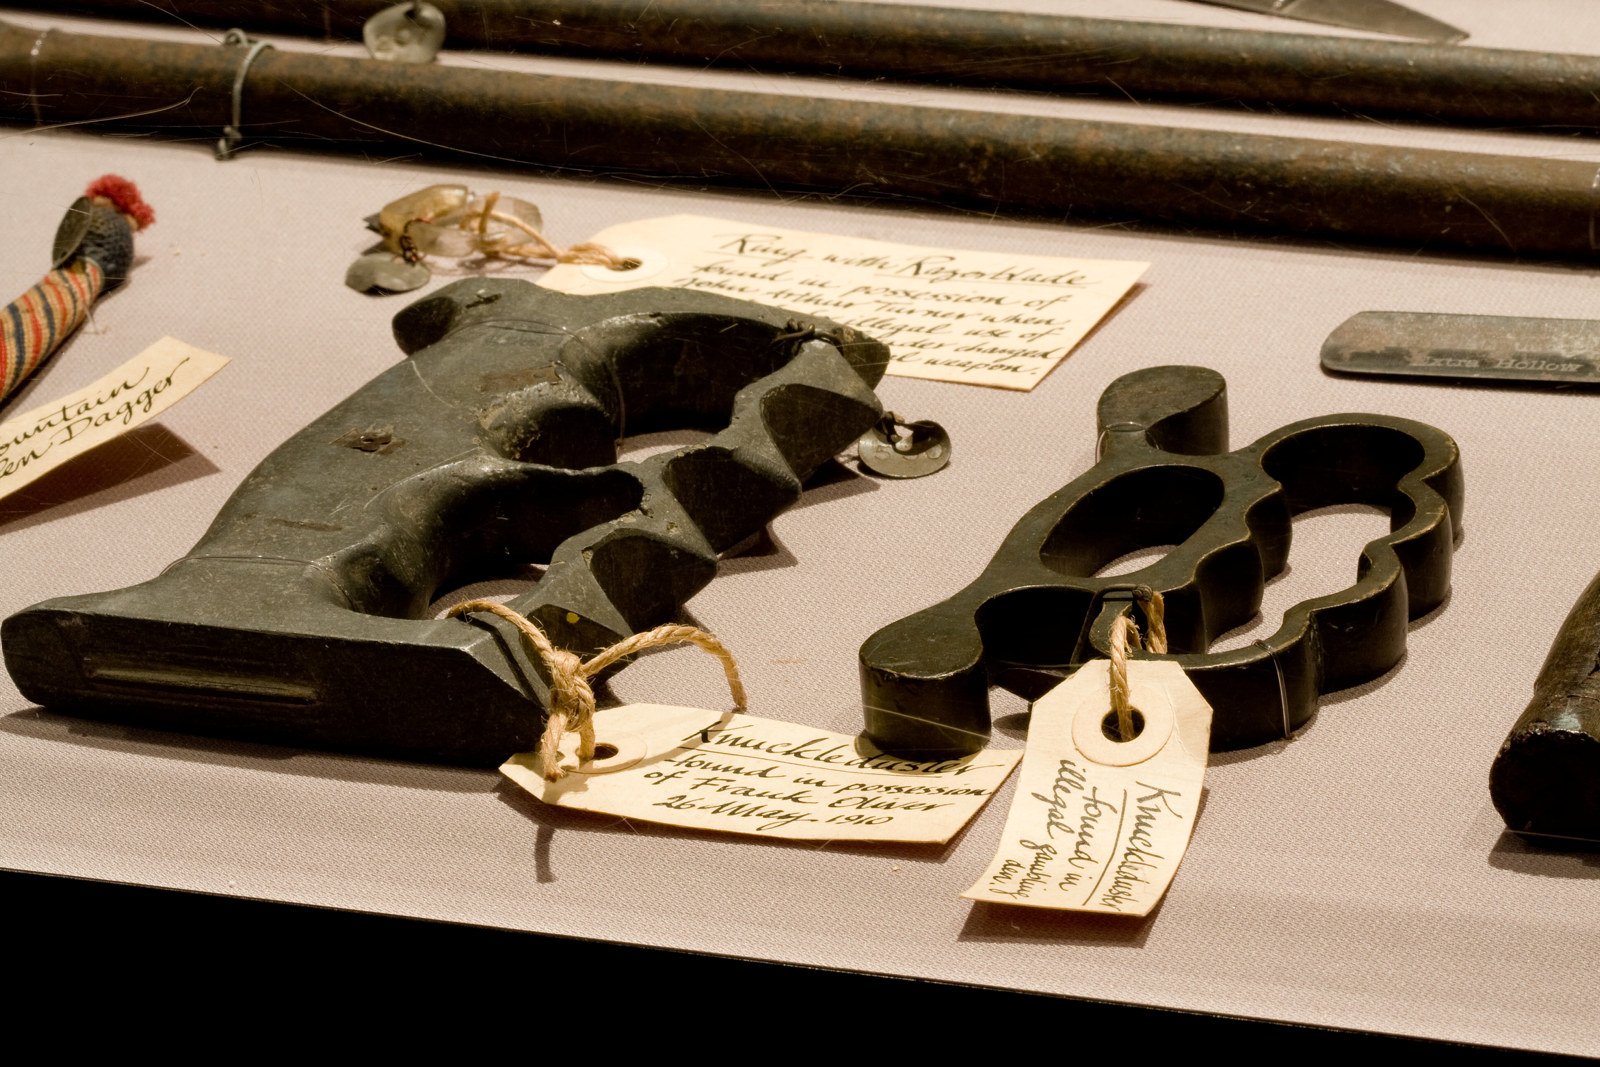 Knuckledusters on display in the Crime Museum at the Justice and Police Museum, Sydney.